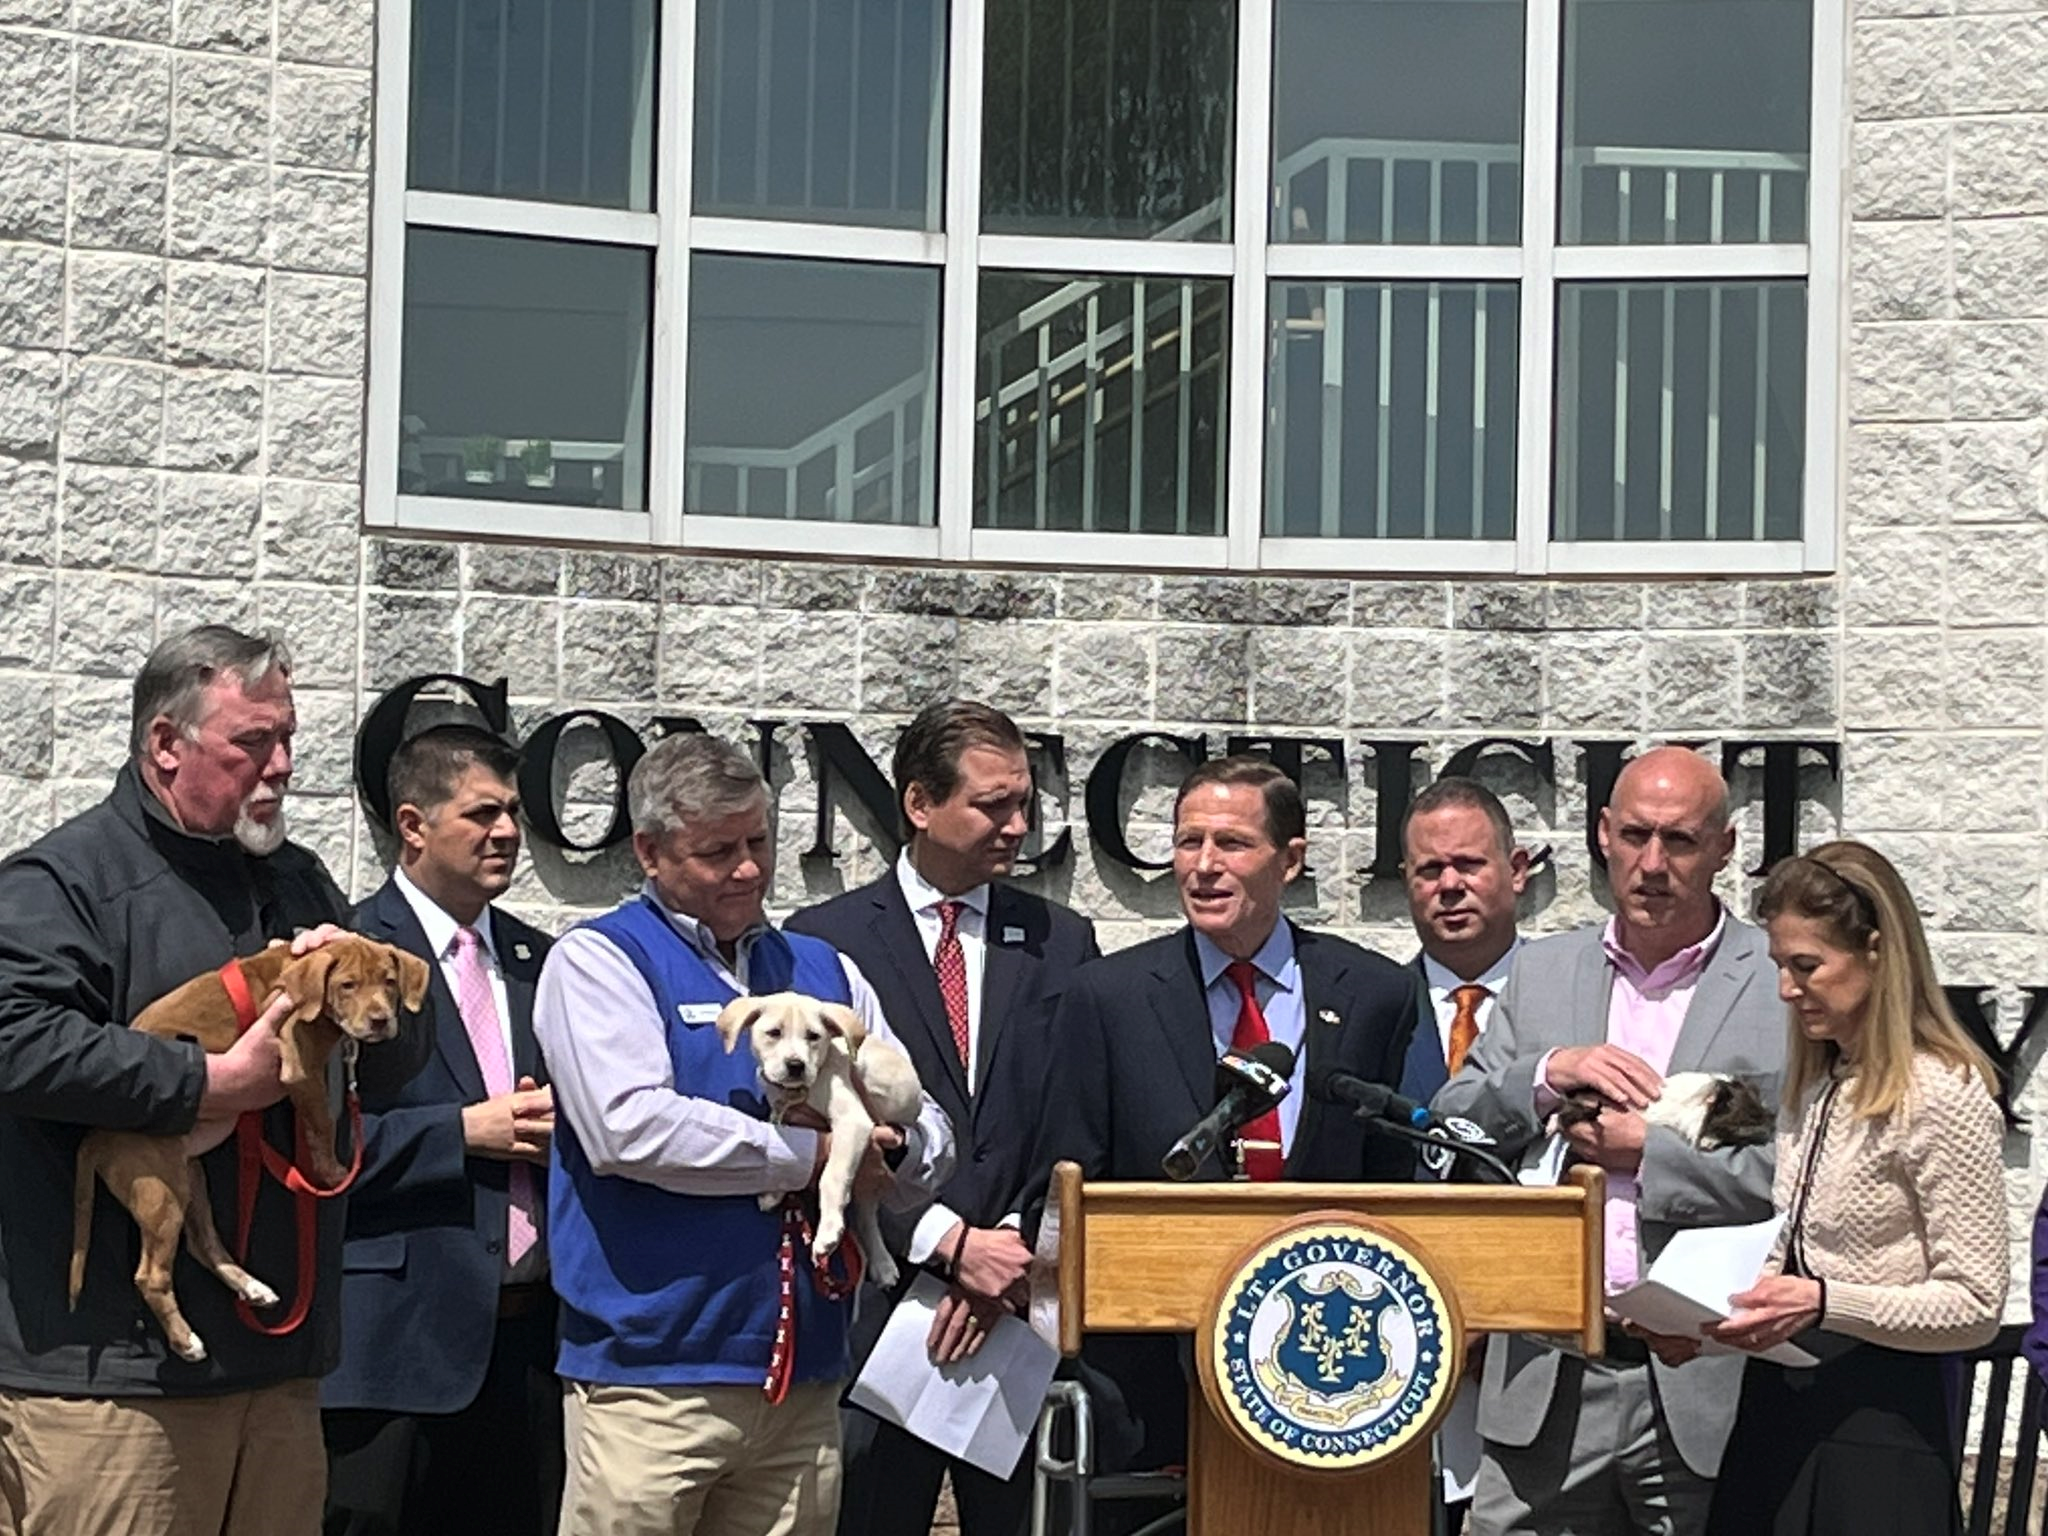 Blumenthal joined an event with the CT Humane Society to speak out against animal cruelty.